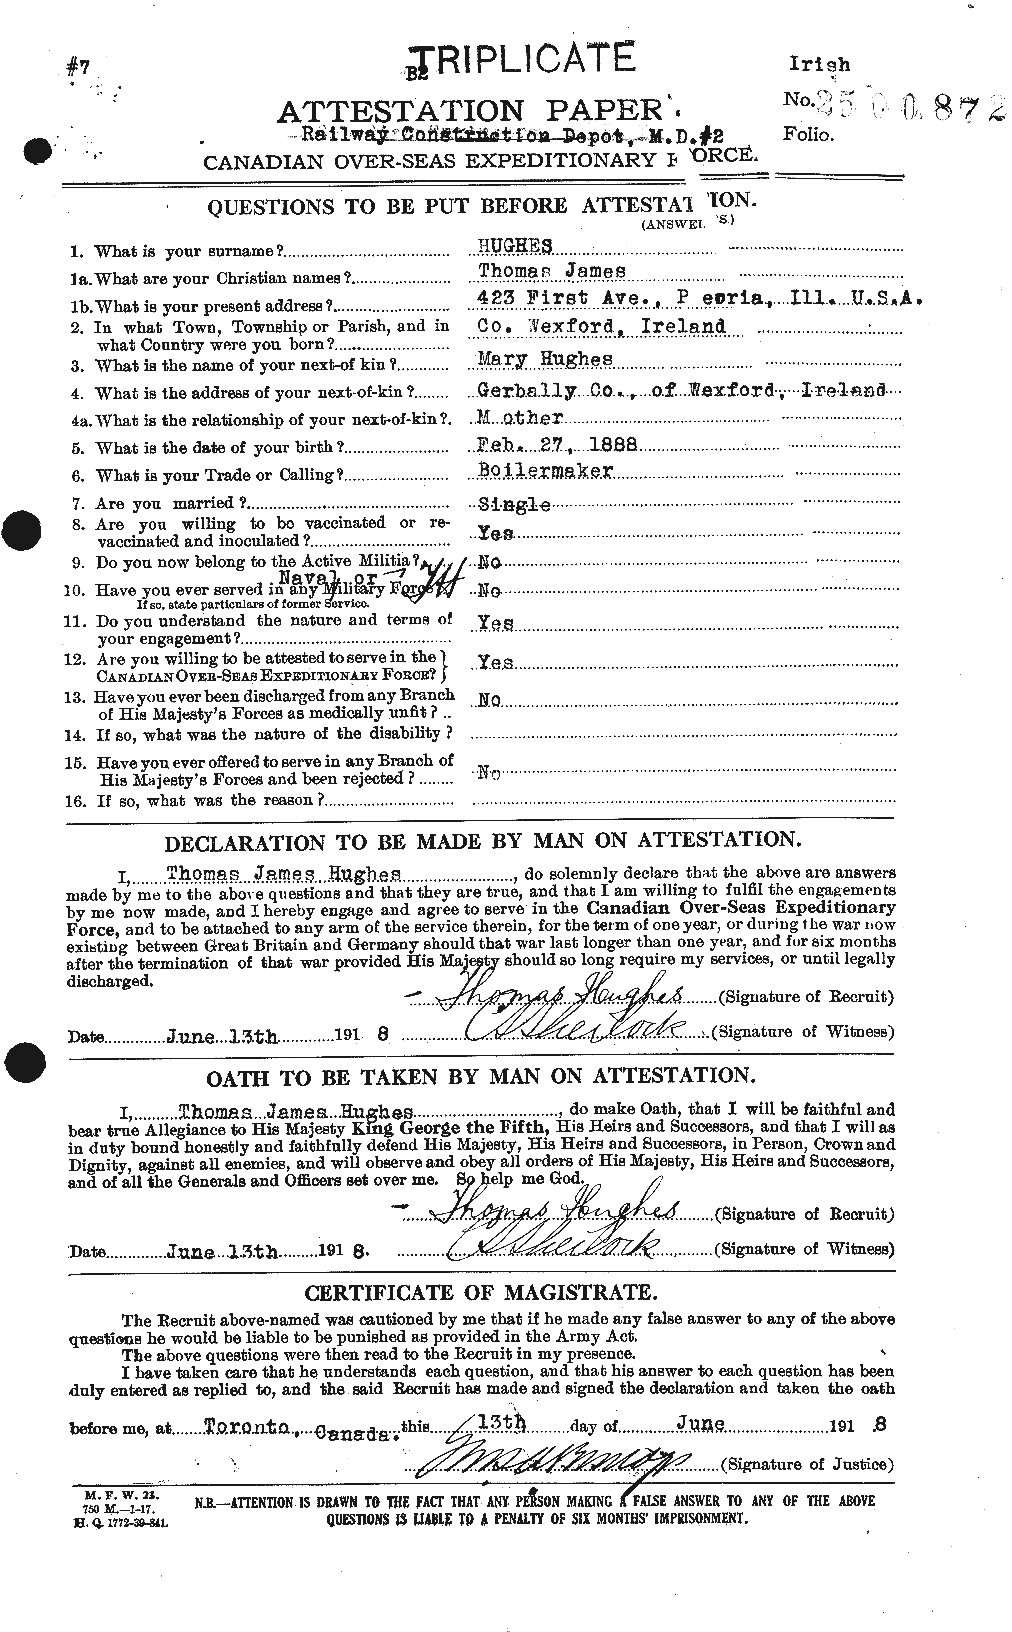 Personnel Records of the First World War - CEF 405837a